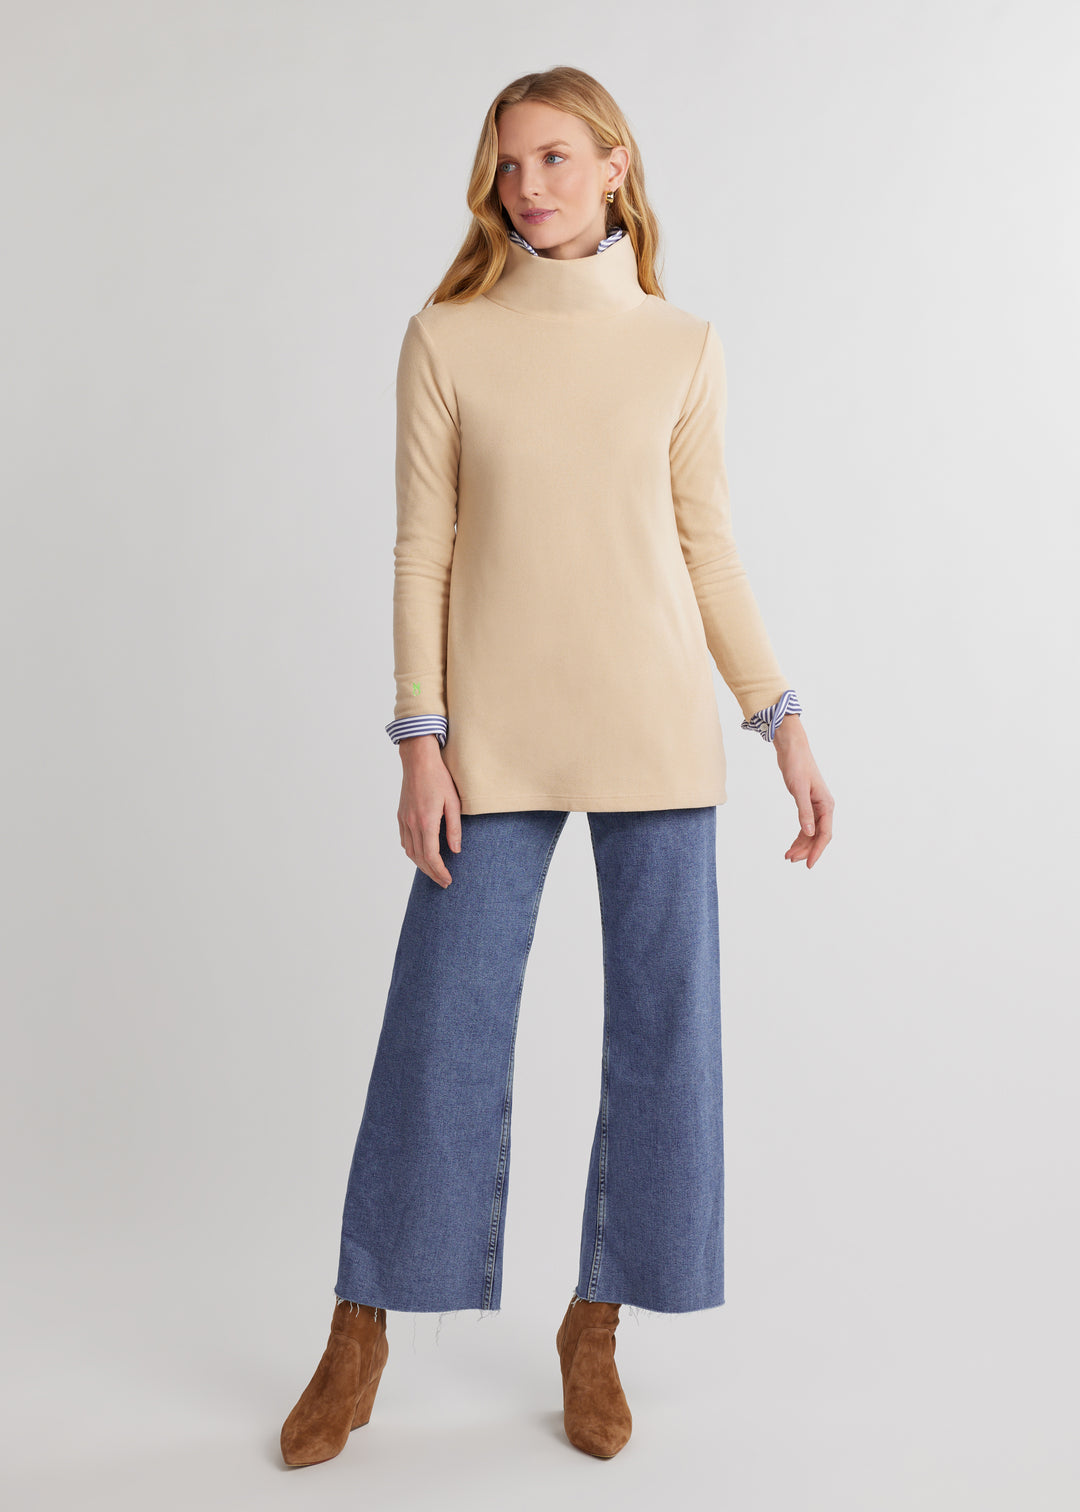 Cobble Hill Turtleneck in Terry Fleece (Natural Blush)